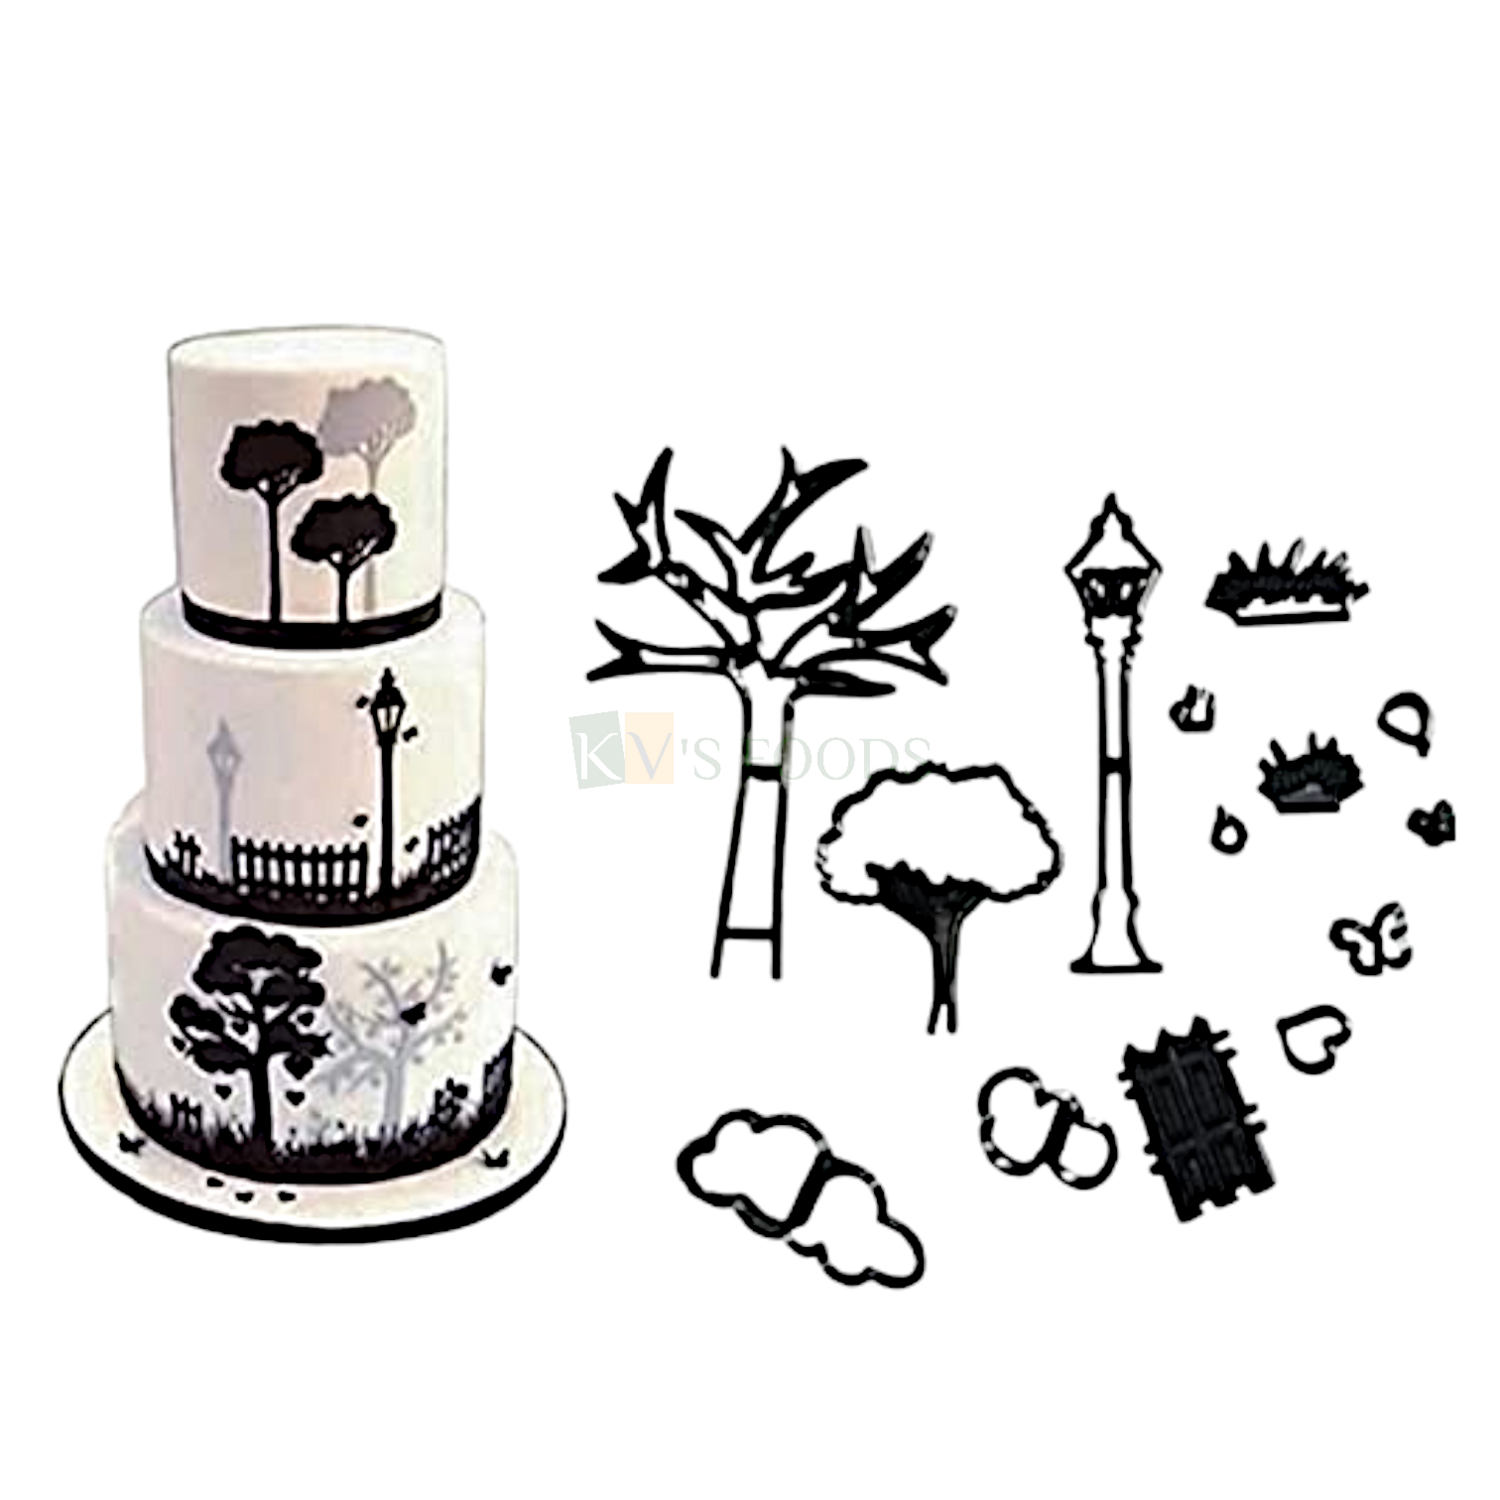 14 PCS Black Nature Park Series, Garden Trees,Street Lamps, Clouds Butterfly, Fondant Silhouette Plunger Cutters Stamps, Embossing Molds Presses Impression, Pancake Cookies Birthday Cakes Decoration